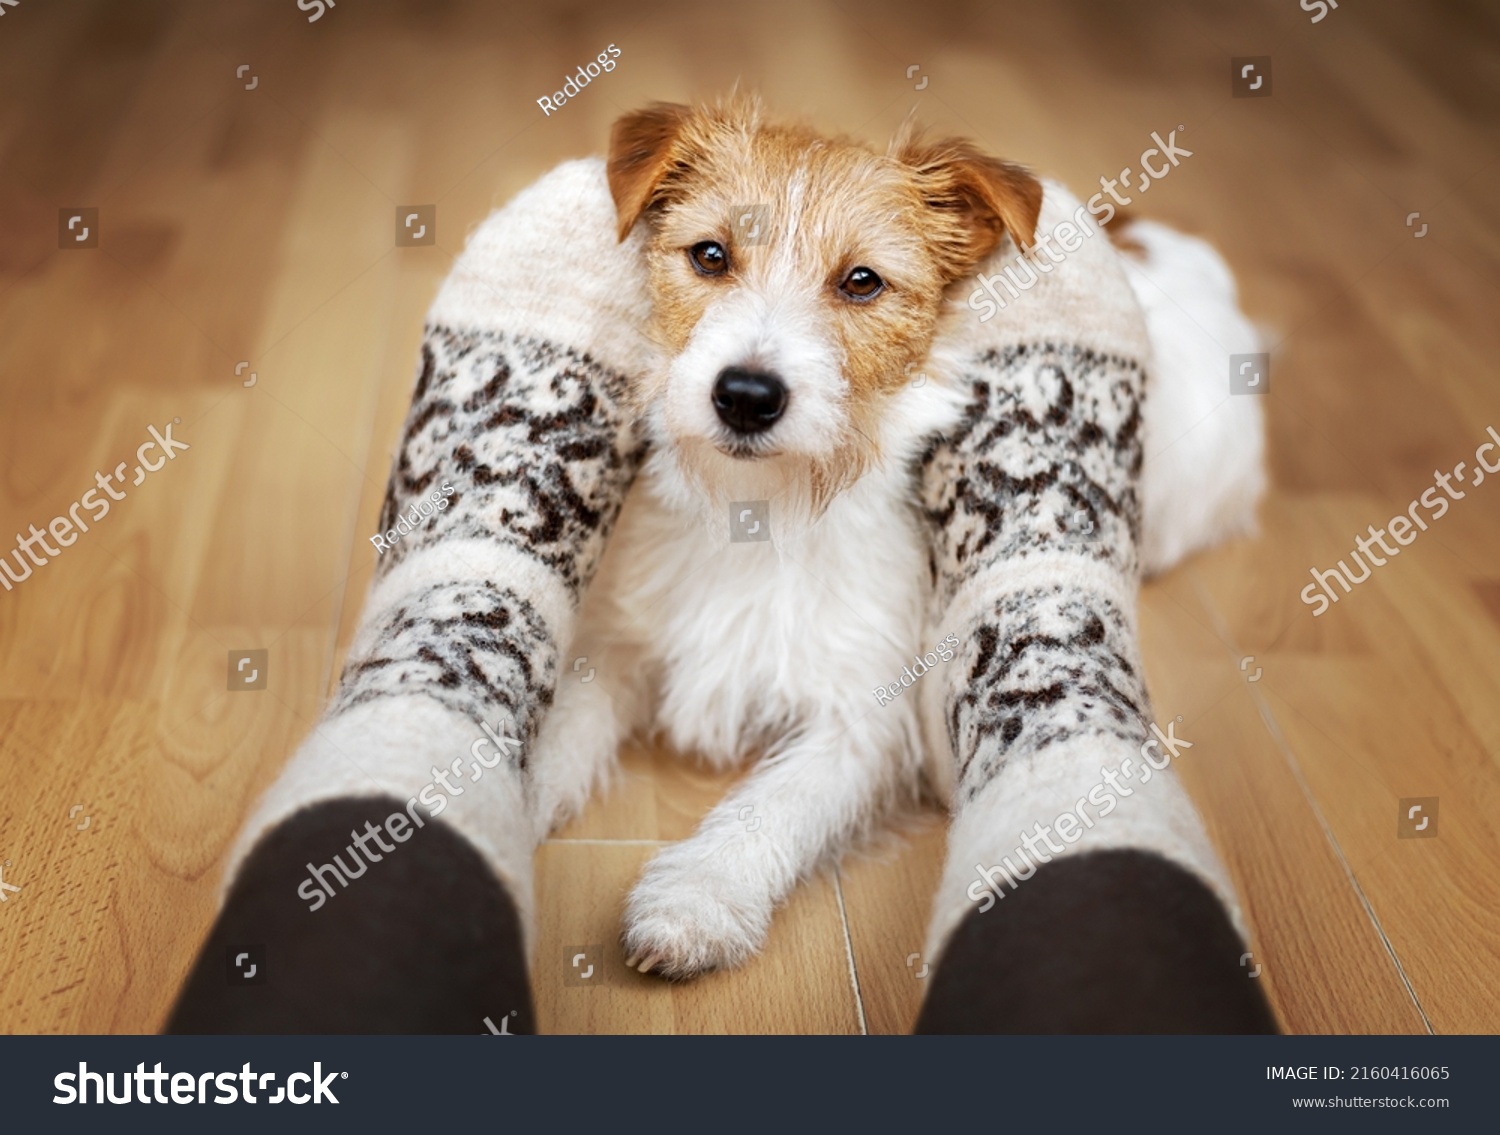 Small breed cute jack russell terrier dog looking, relaxing between owner's legs at home. Relationship, friendship of human and animal, pet love and care.
 #2160416065